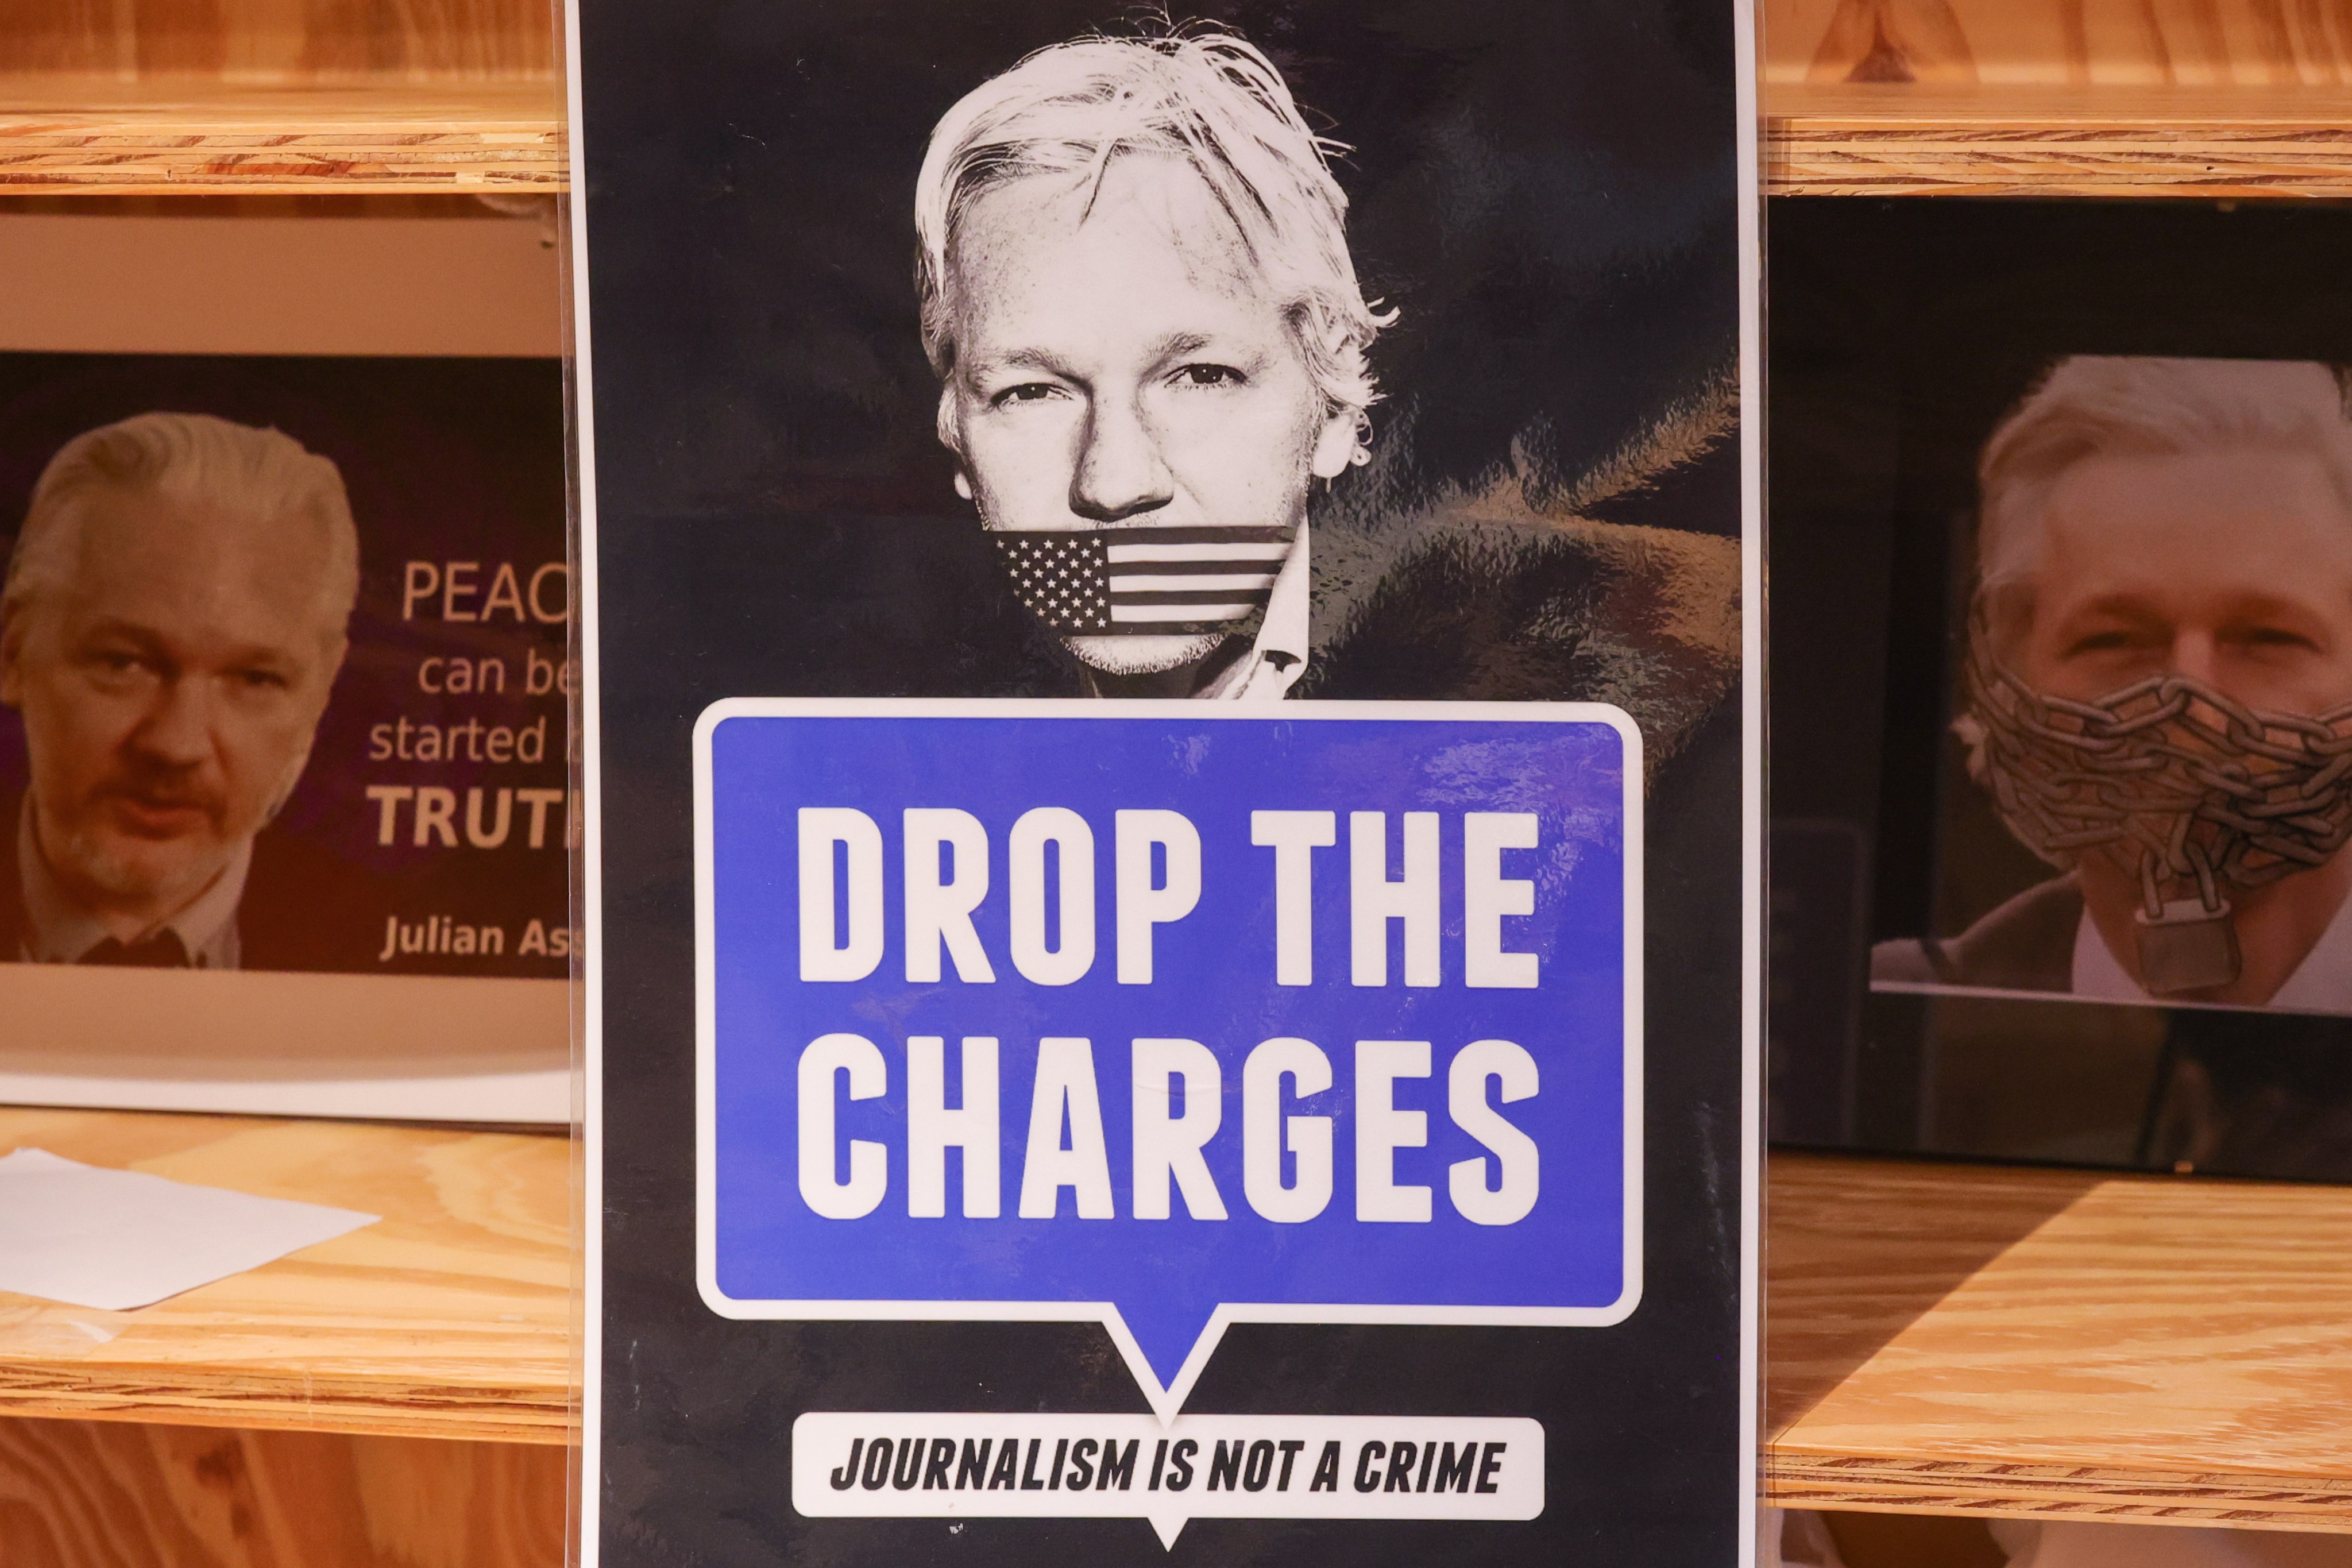 Signs are displayed at a protest to mark the fourth anniversary of WikiLeaks founder Julian Assange’s detention in London’s Belmarsh prison, in Brussels, Belgium, on April 11. Photo: EPA-EFE